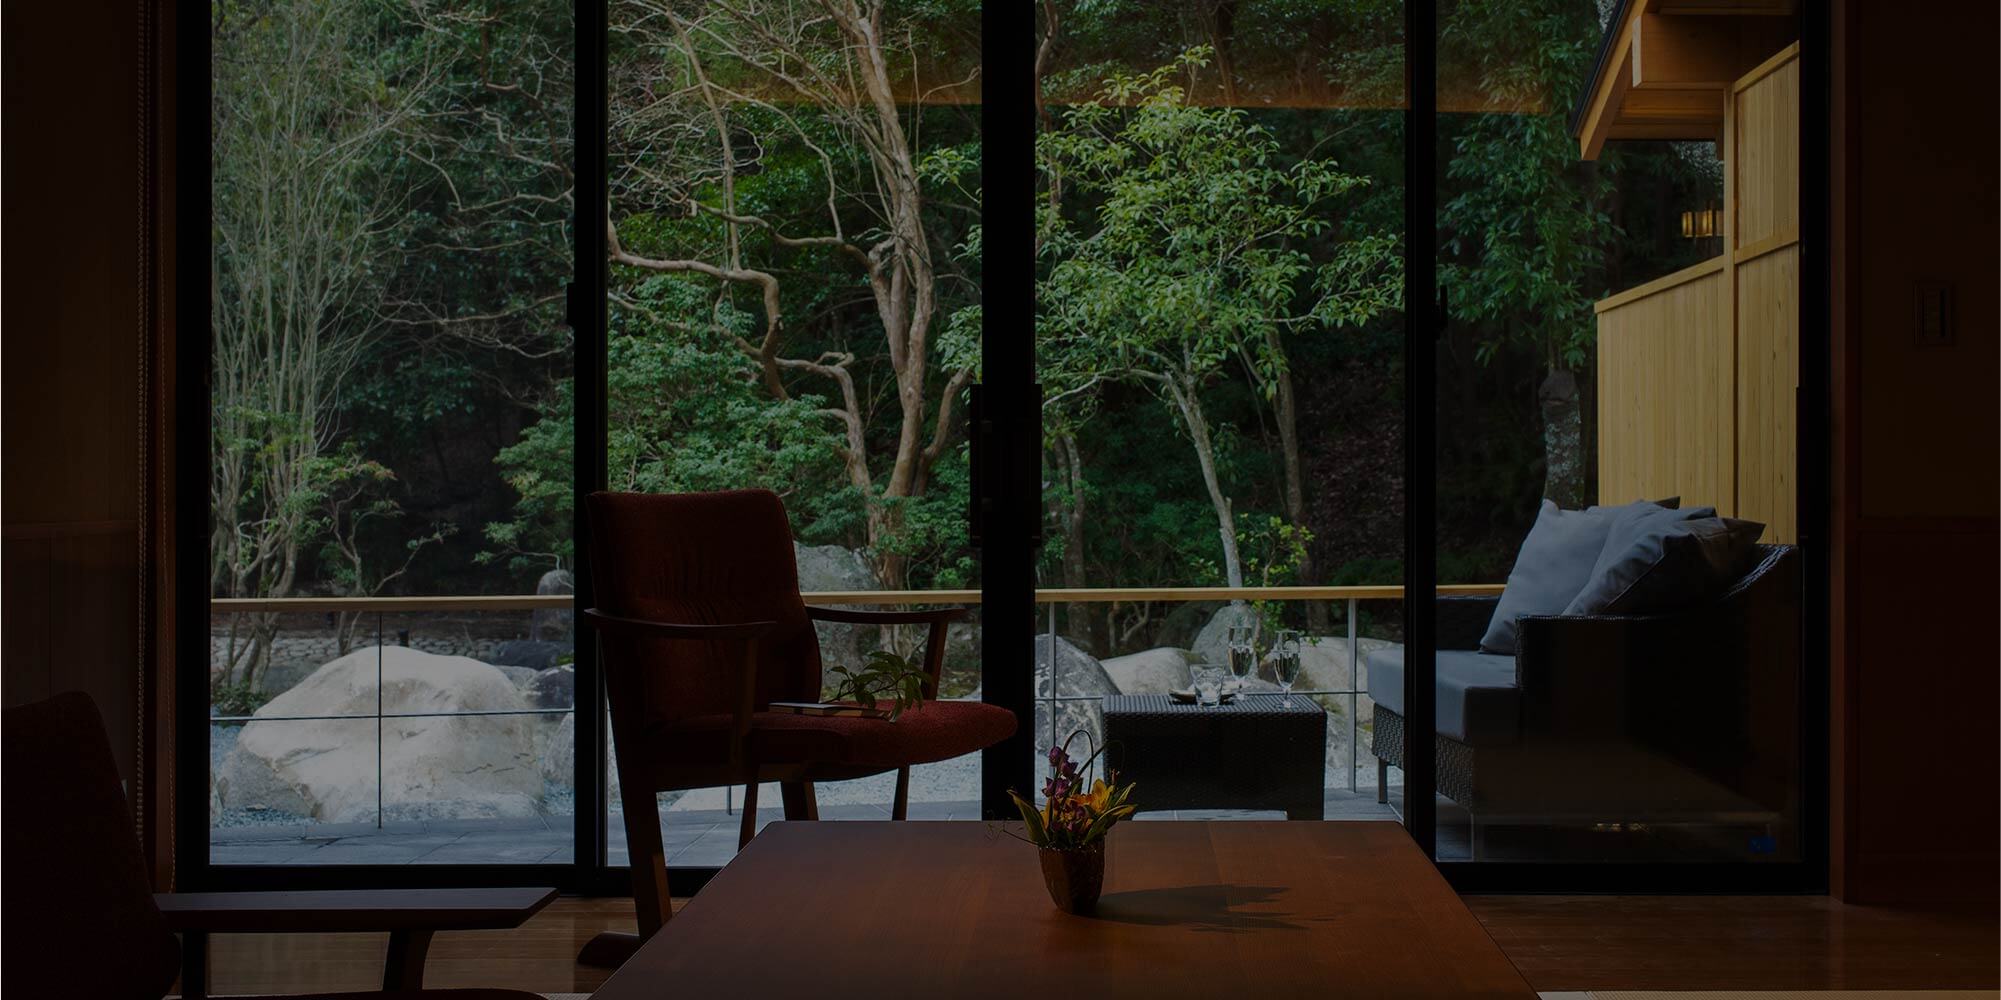 A resort offering peaceful moments nearby Ise Grand Shrine, far from hustles and bustles